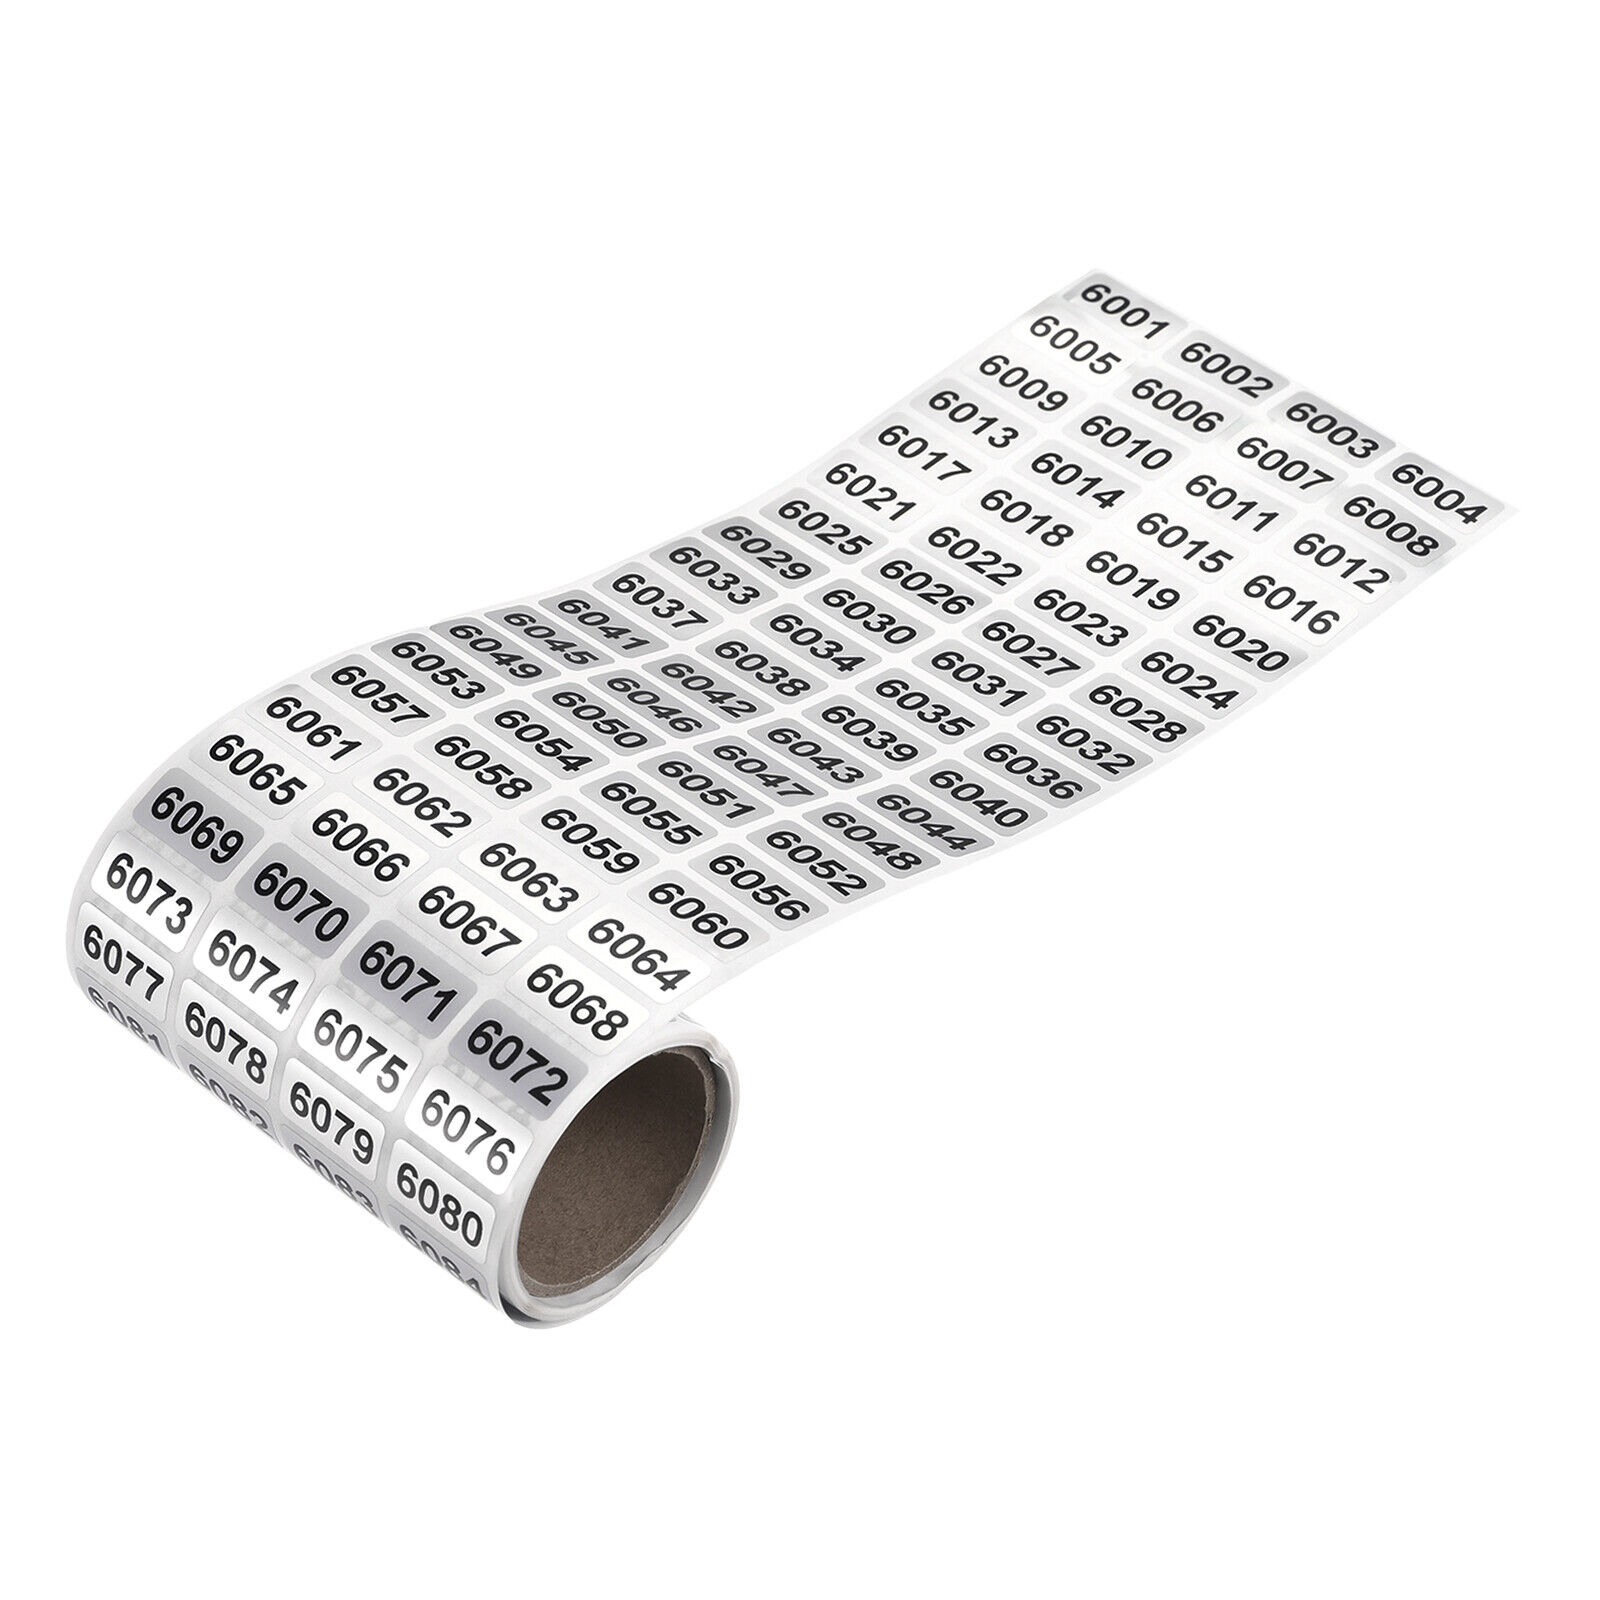 6001 To 7000 Consecutive Number Stickers Inventory Label Black Numbers